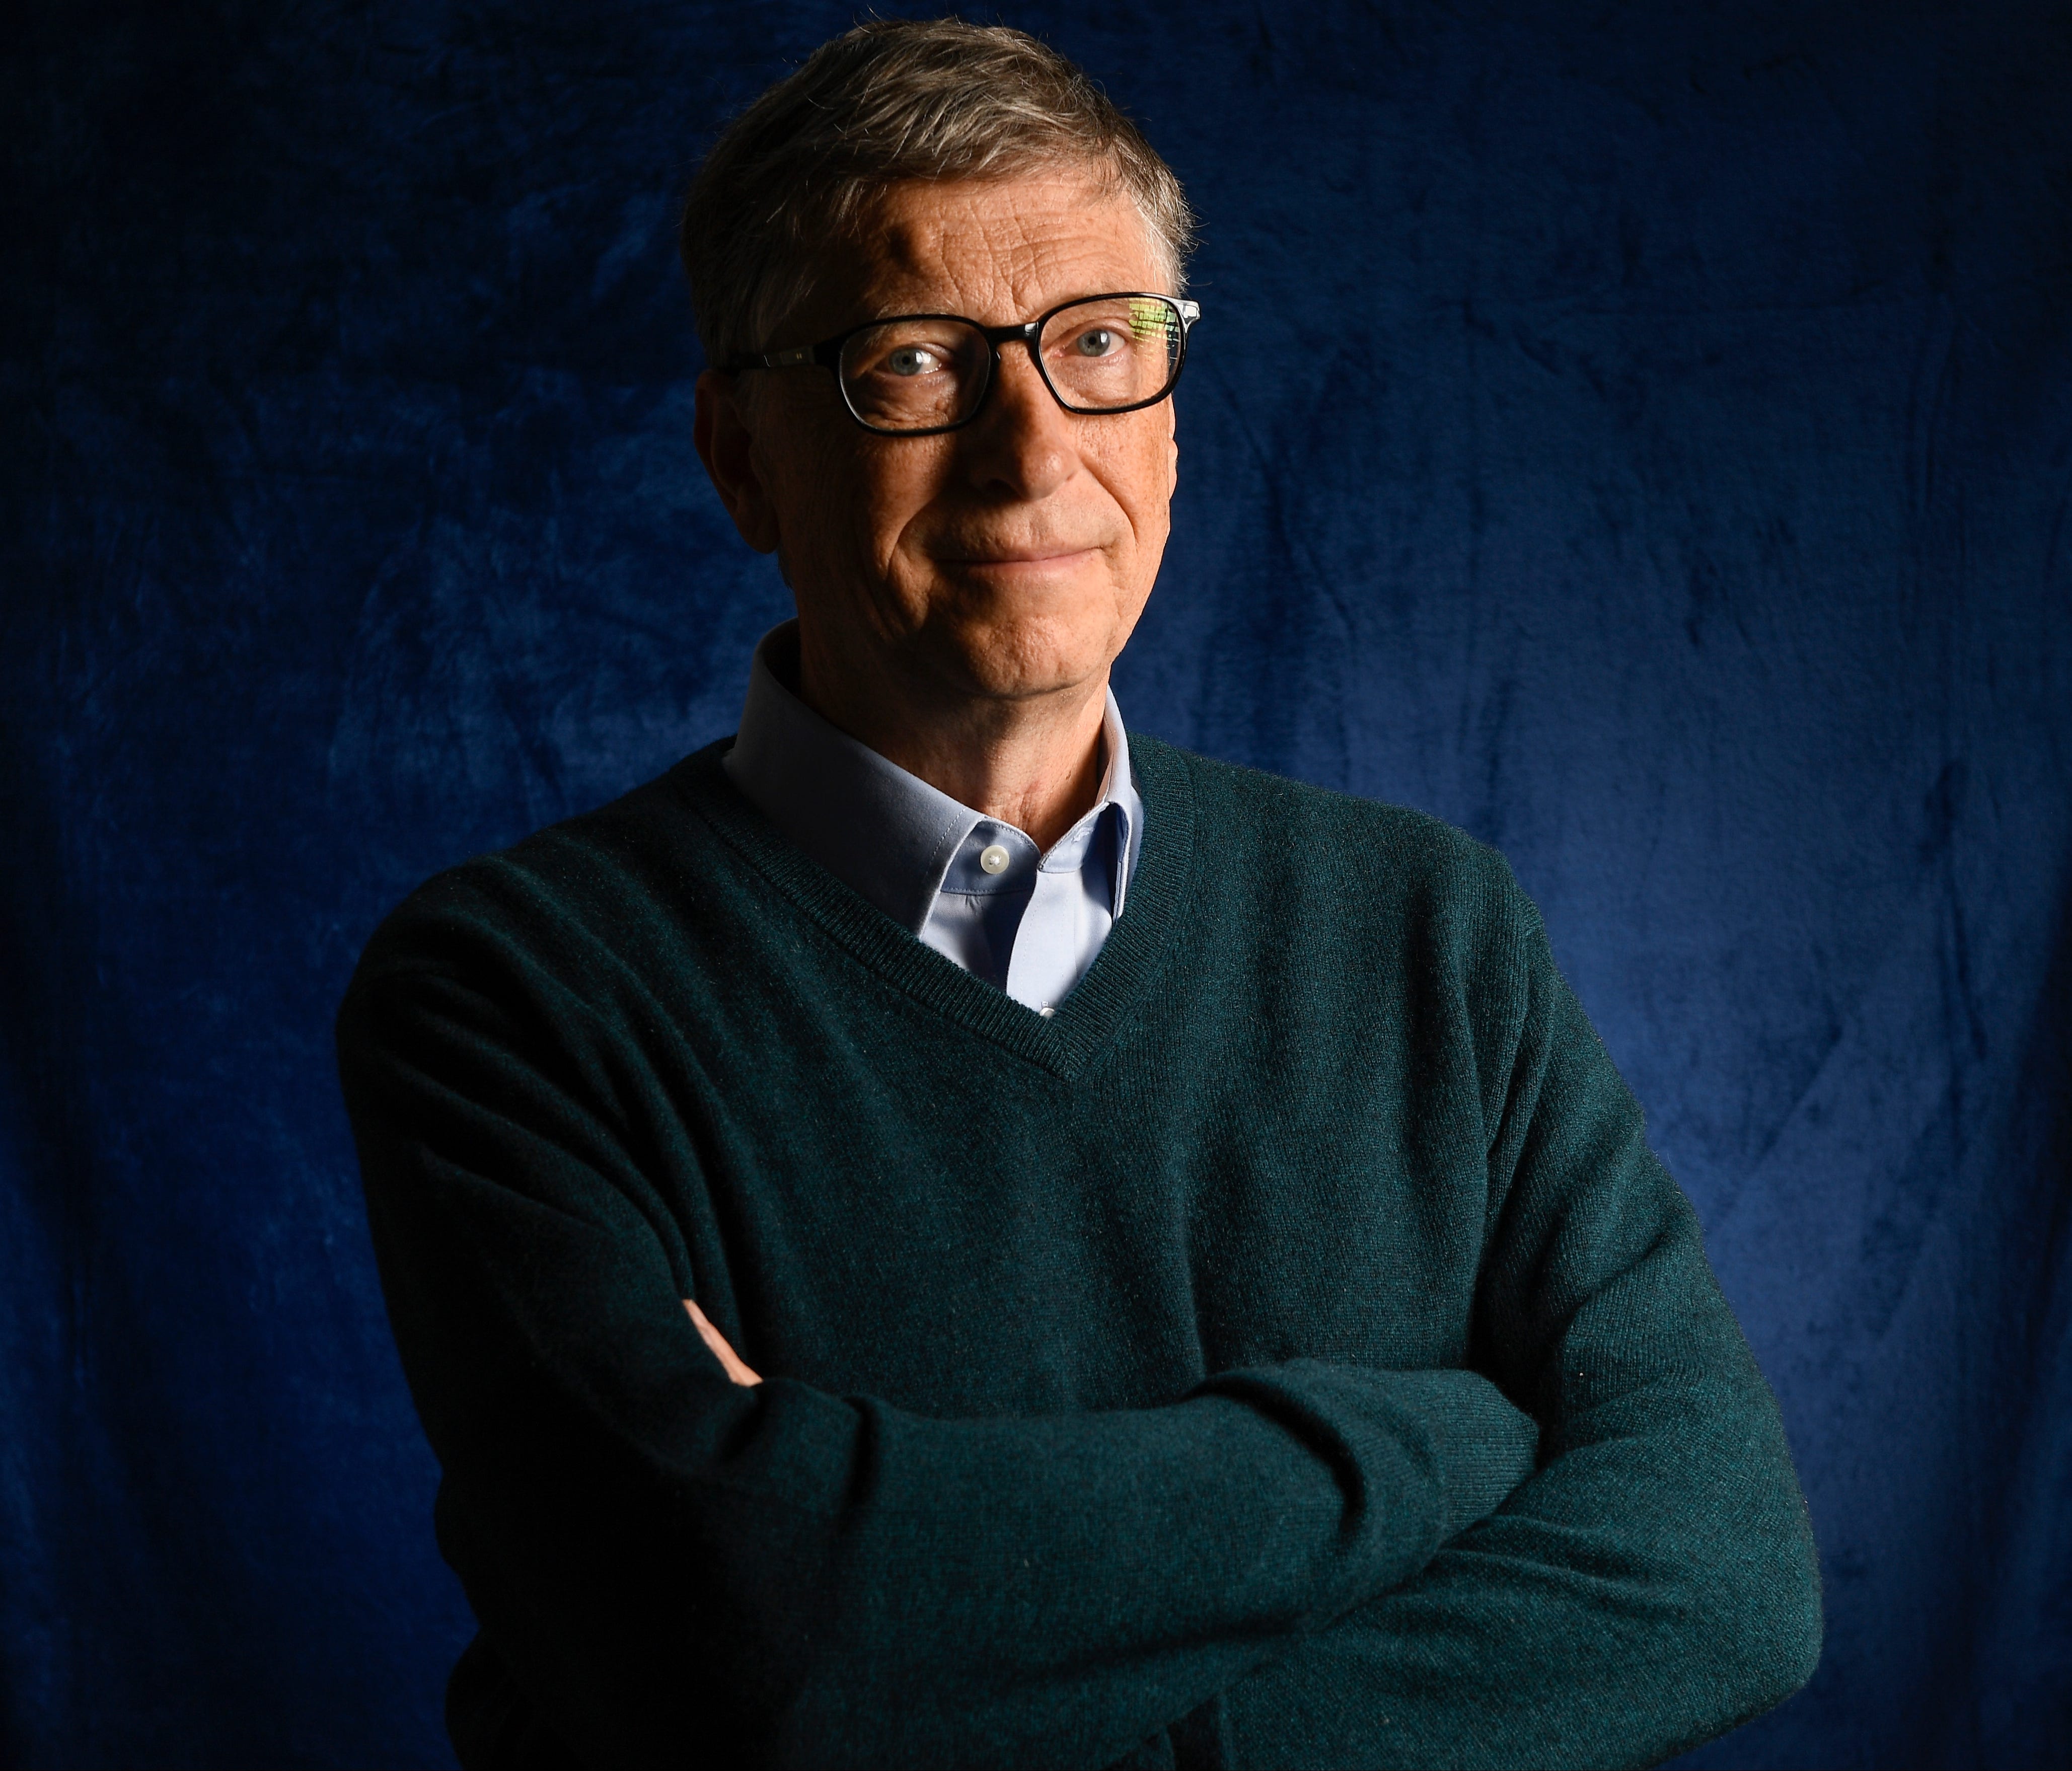 No. 1: Bill Gates | Net worth: $90.8 billion | Microsoft co-founder Bill Gates held the title of the world's richest person since May 2013. He was unseated by Jeff Bezos for a few hours on July 27, but regained the top spot later that day. Gates rema